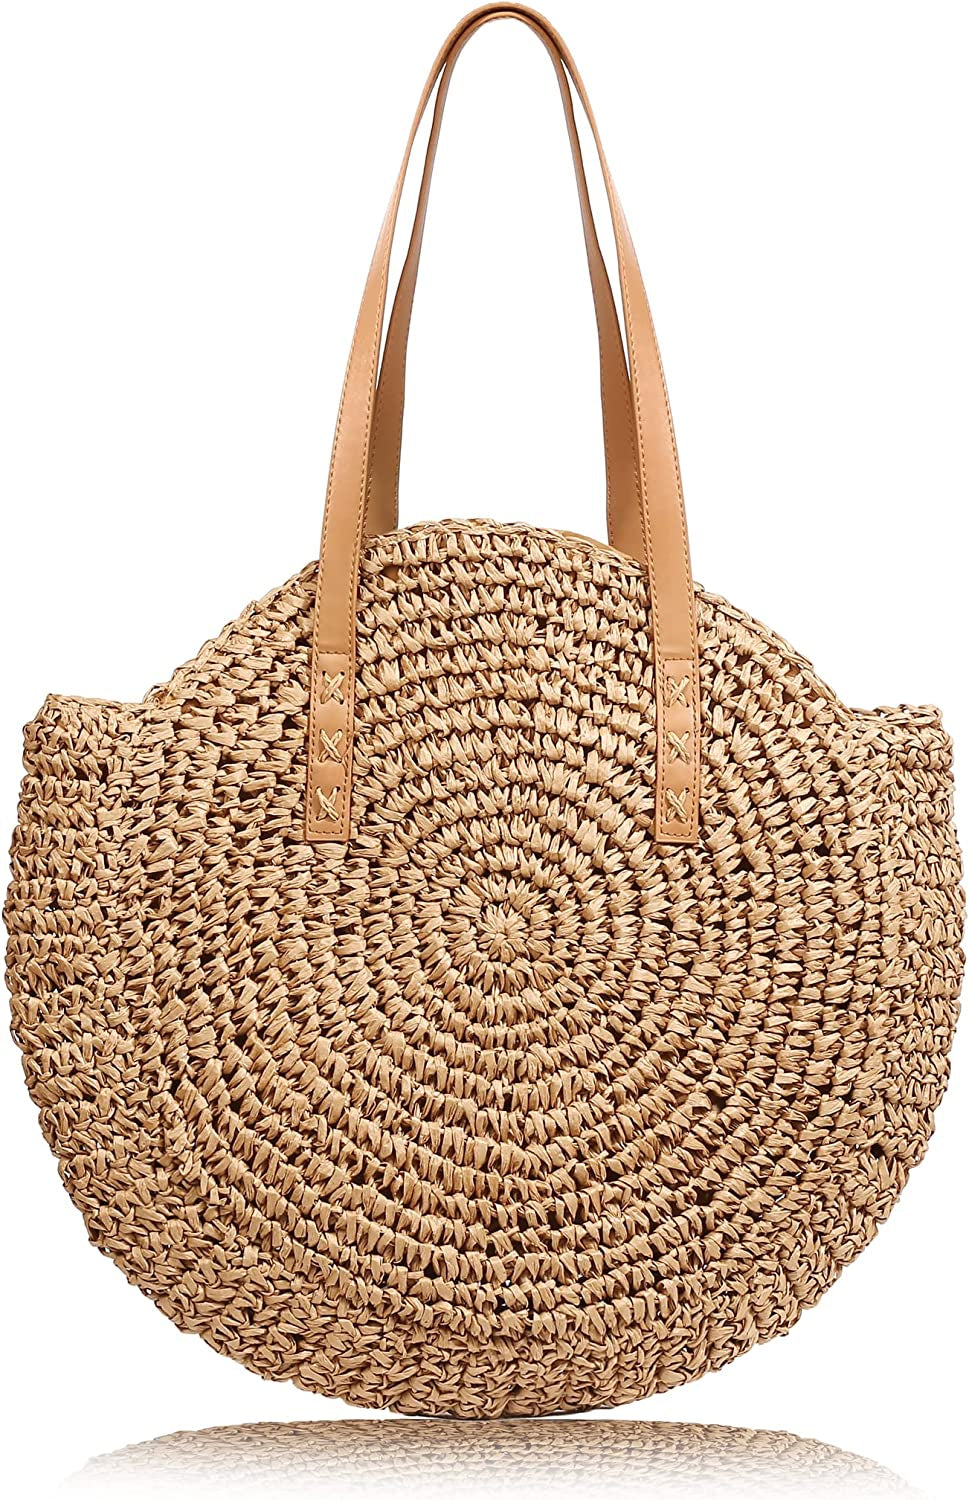  Handmade Woven Shoulder Tote Bags Purse for Women